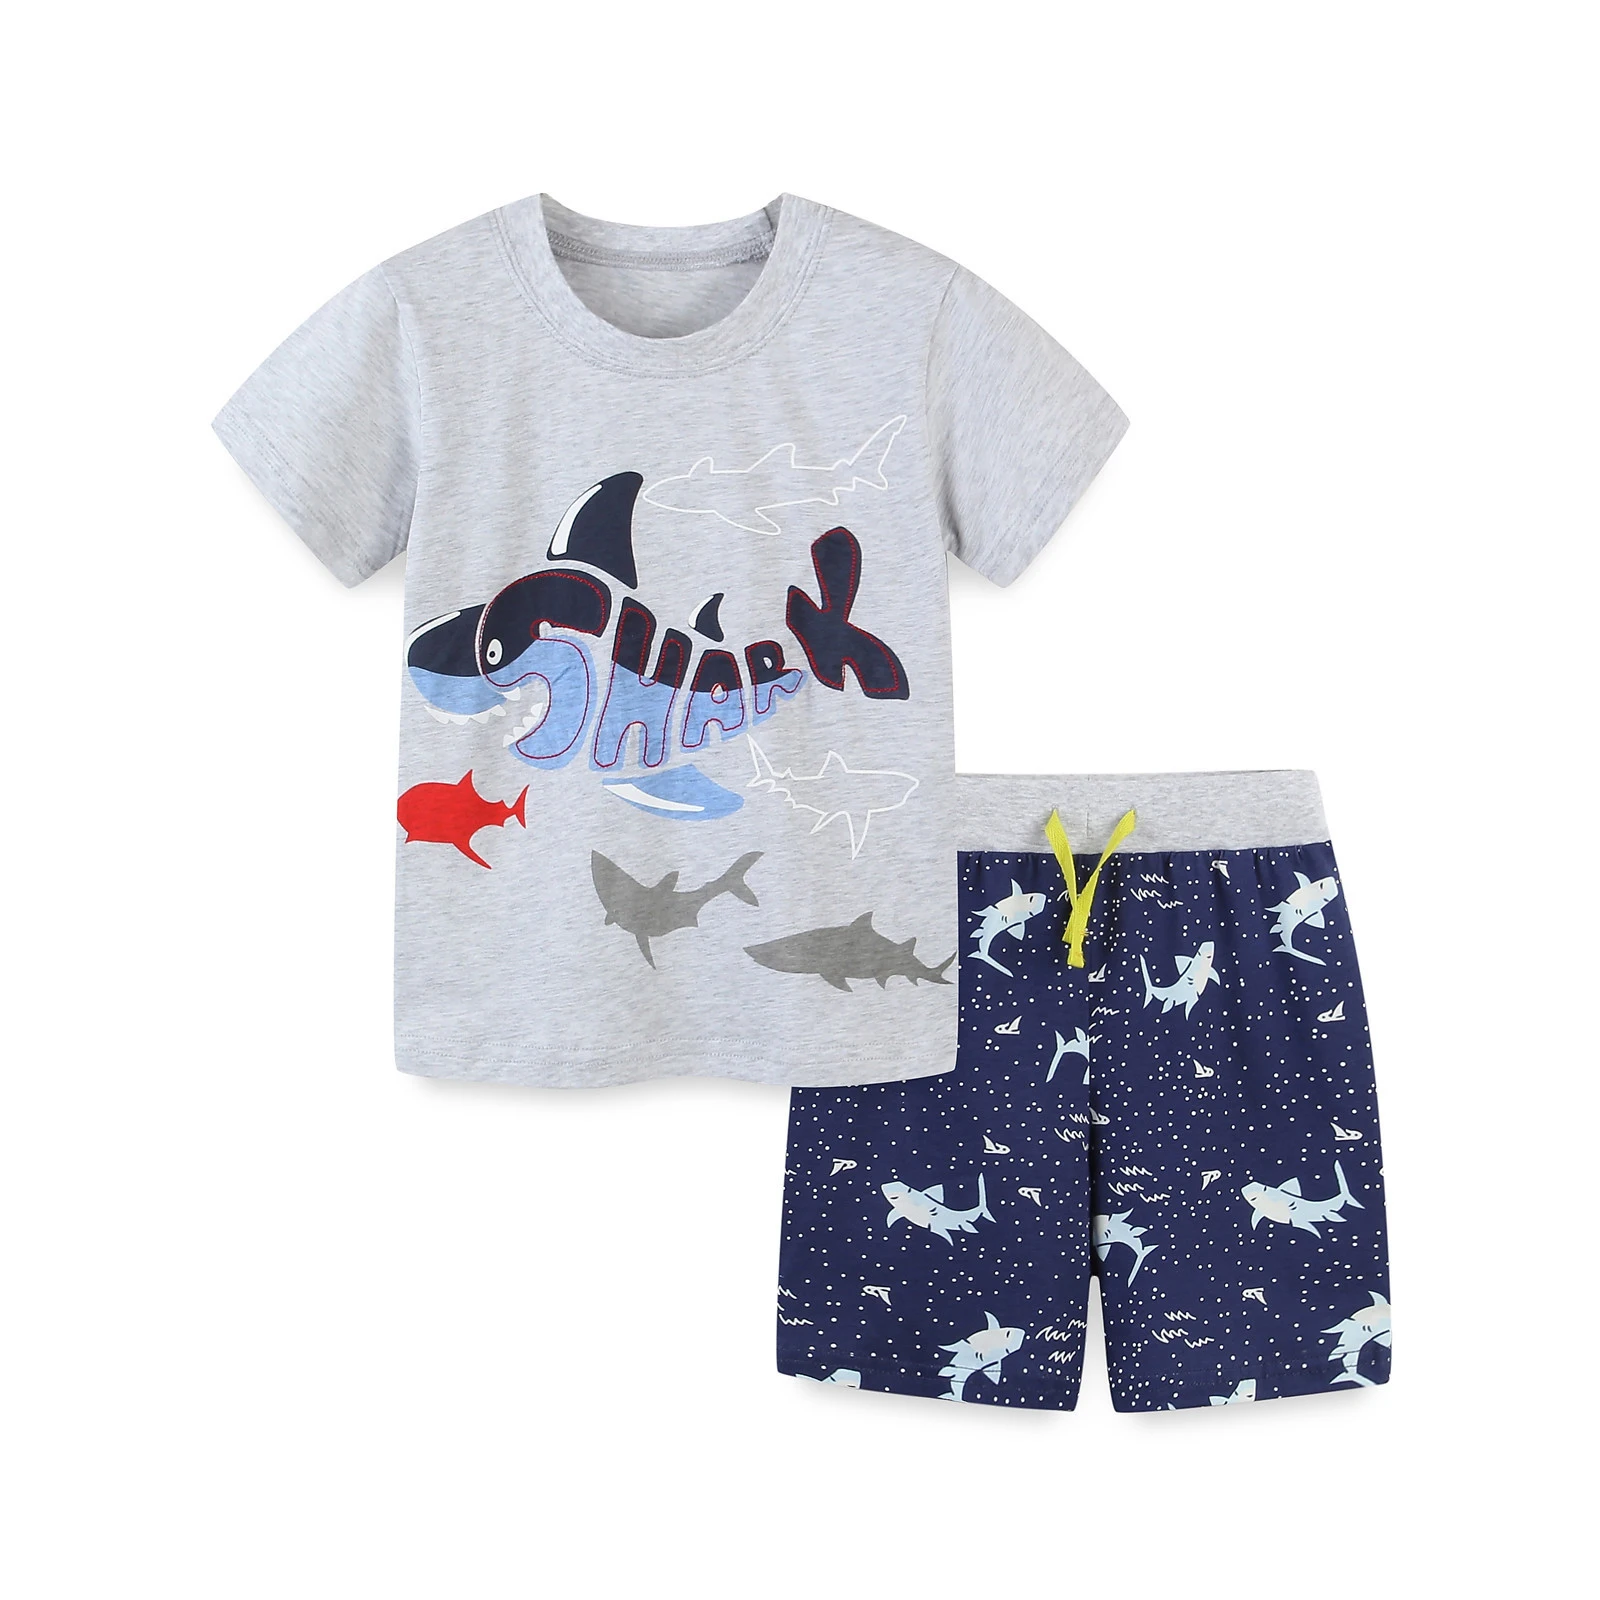 Toddler Boys Cotton Clothing Sets Short Sleeve Tee and Shorts 